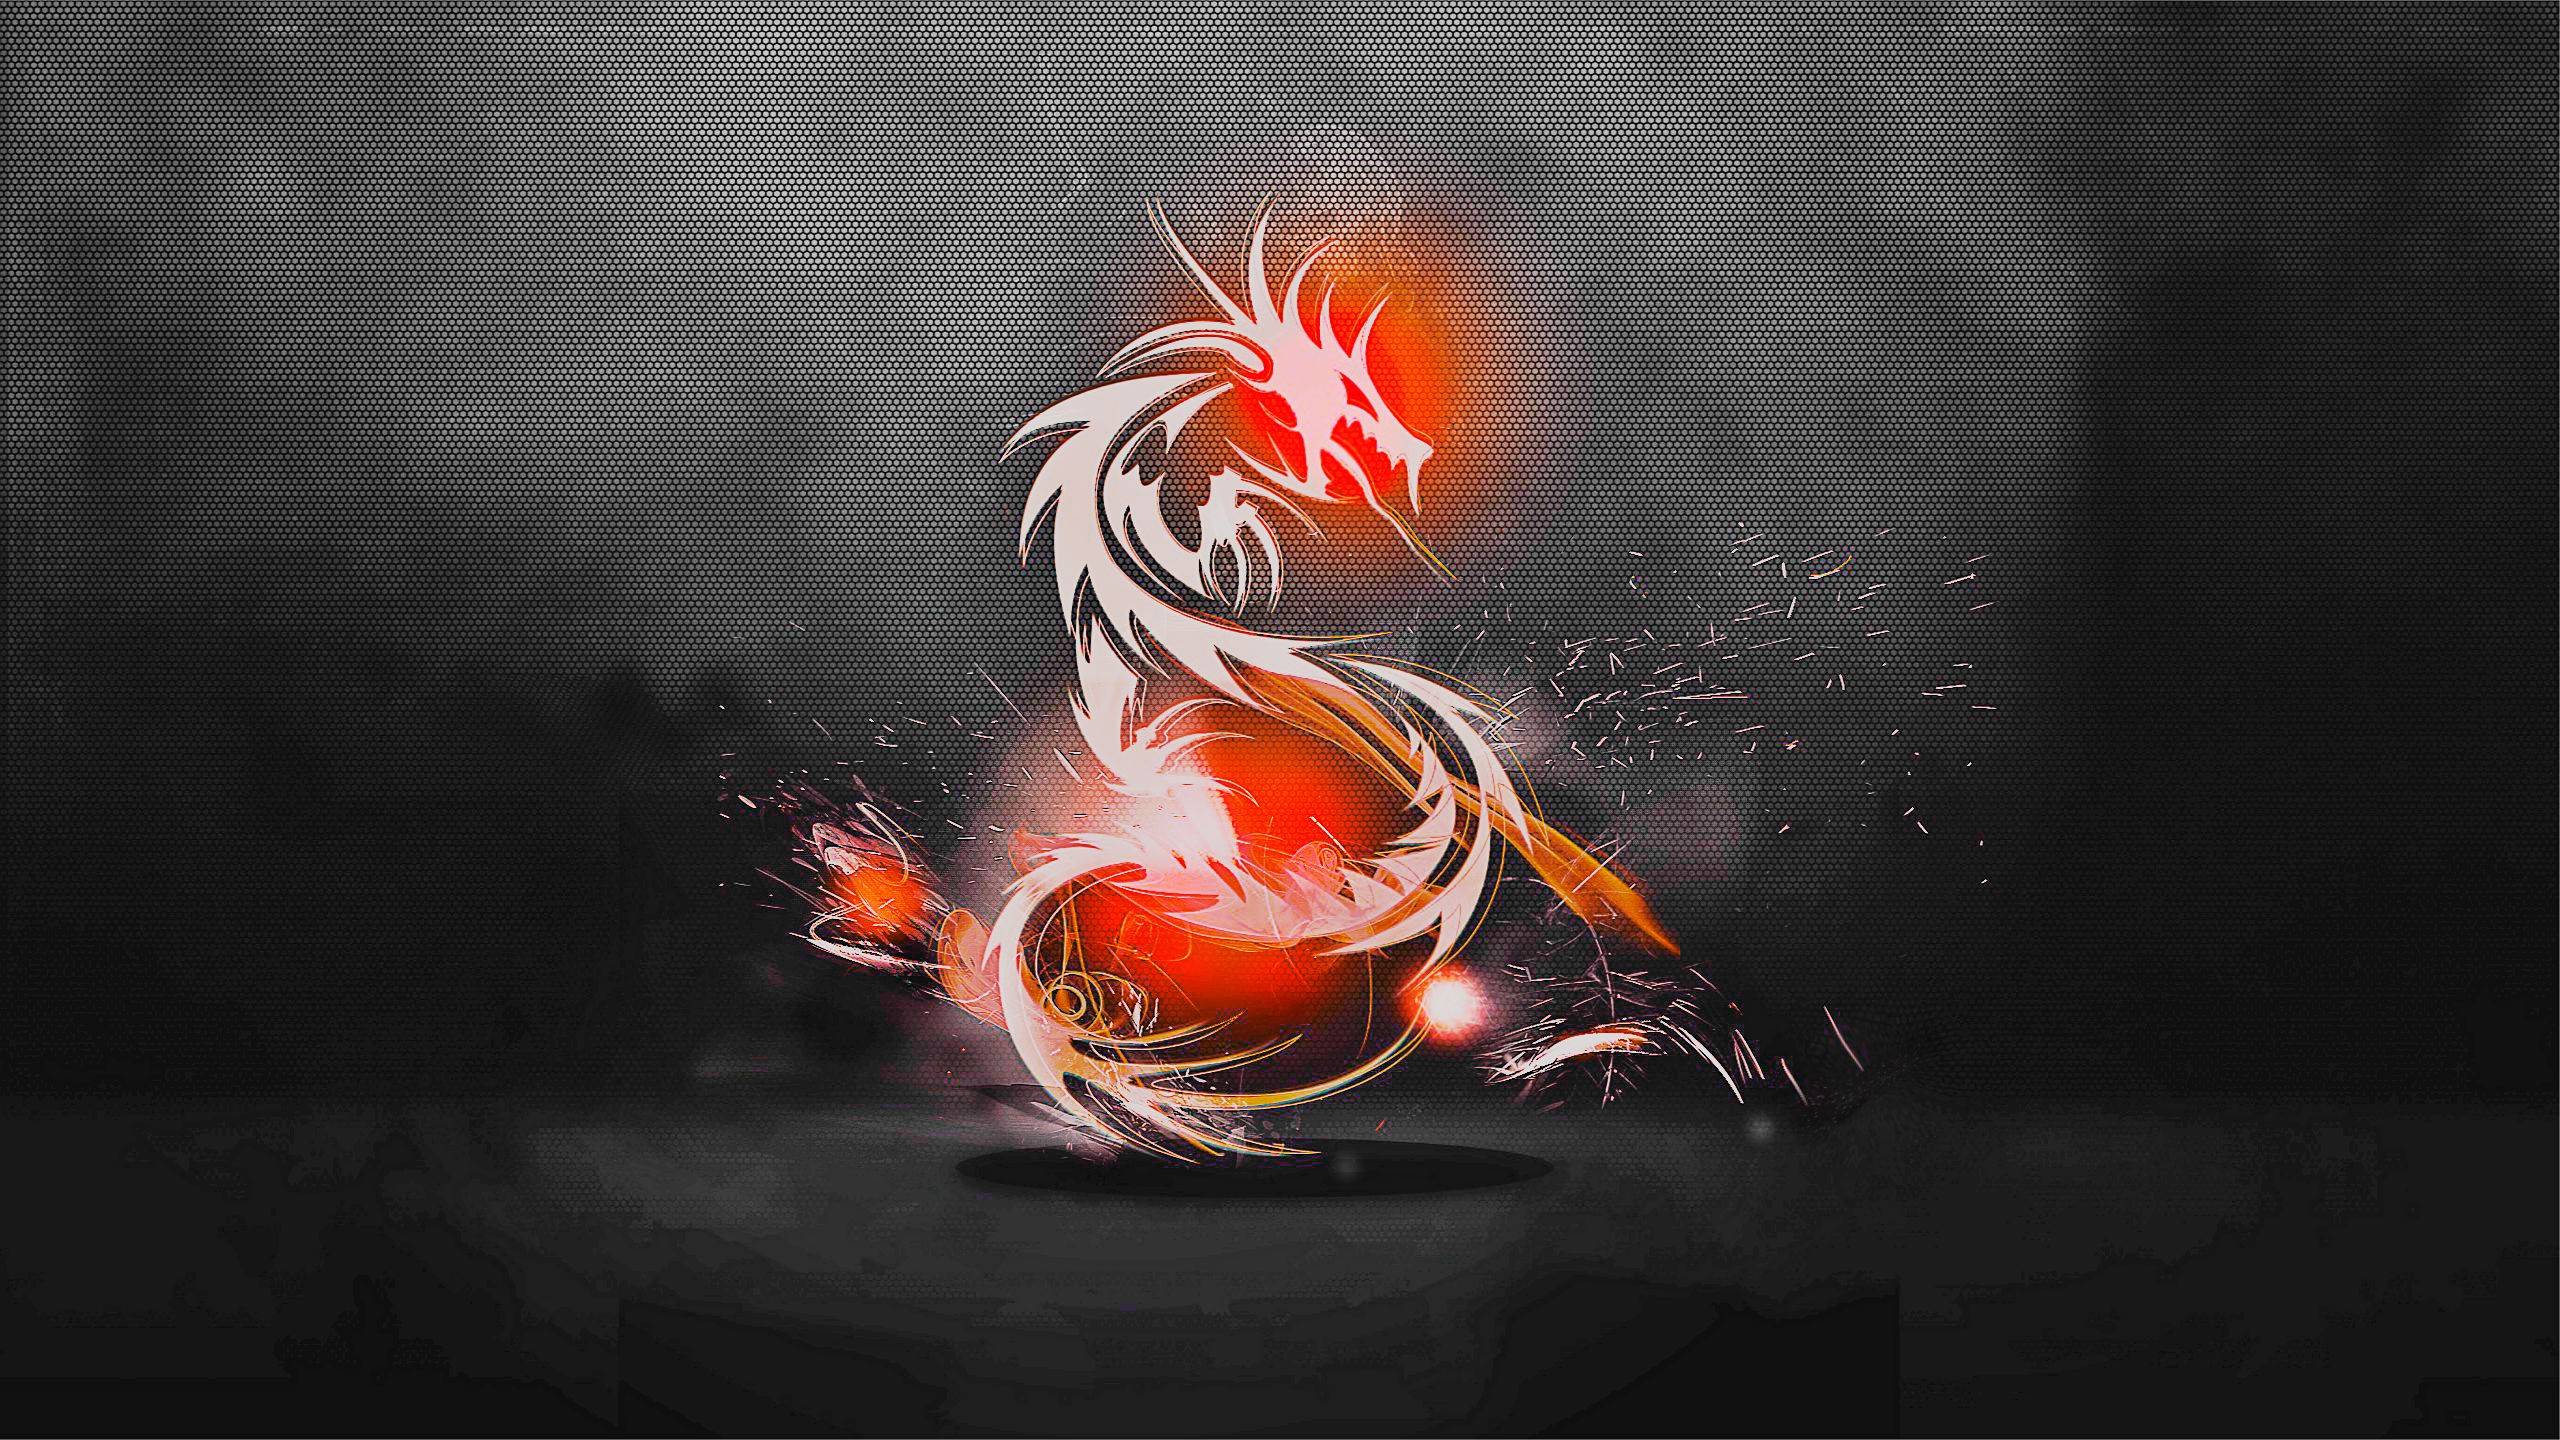 Red And Blue Dragon Wallpapers